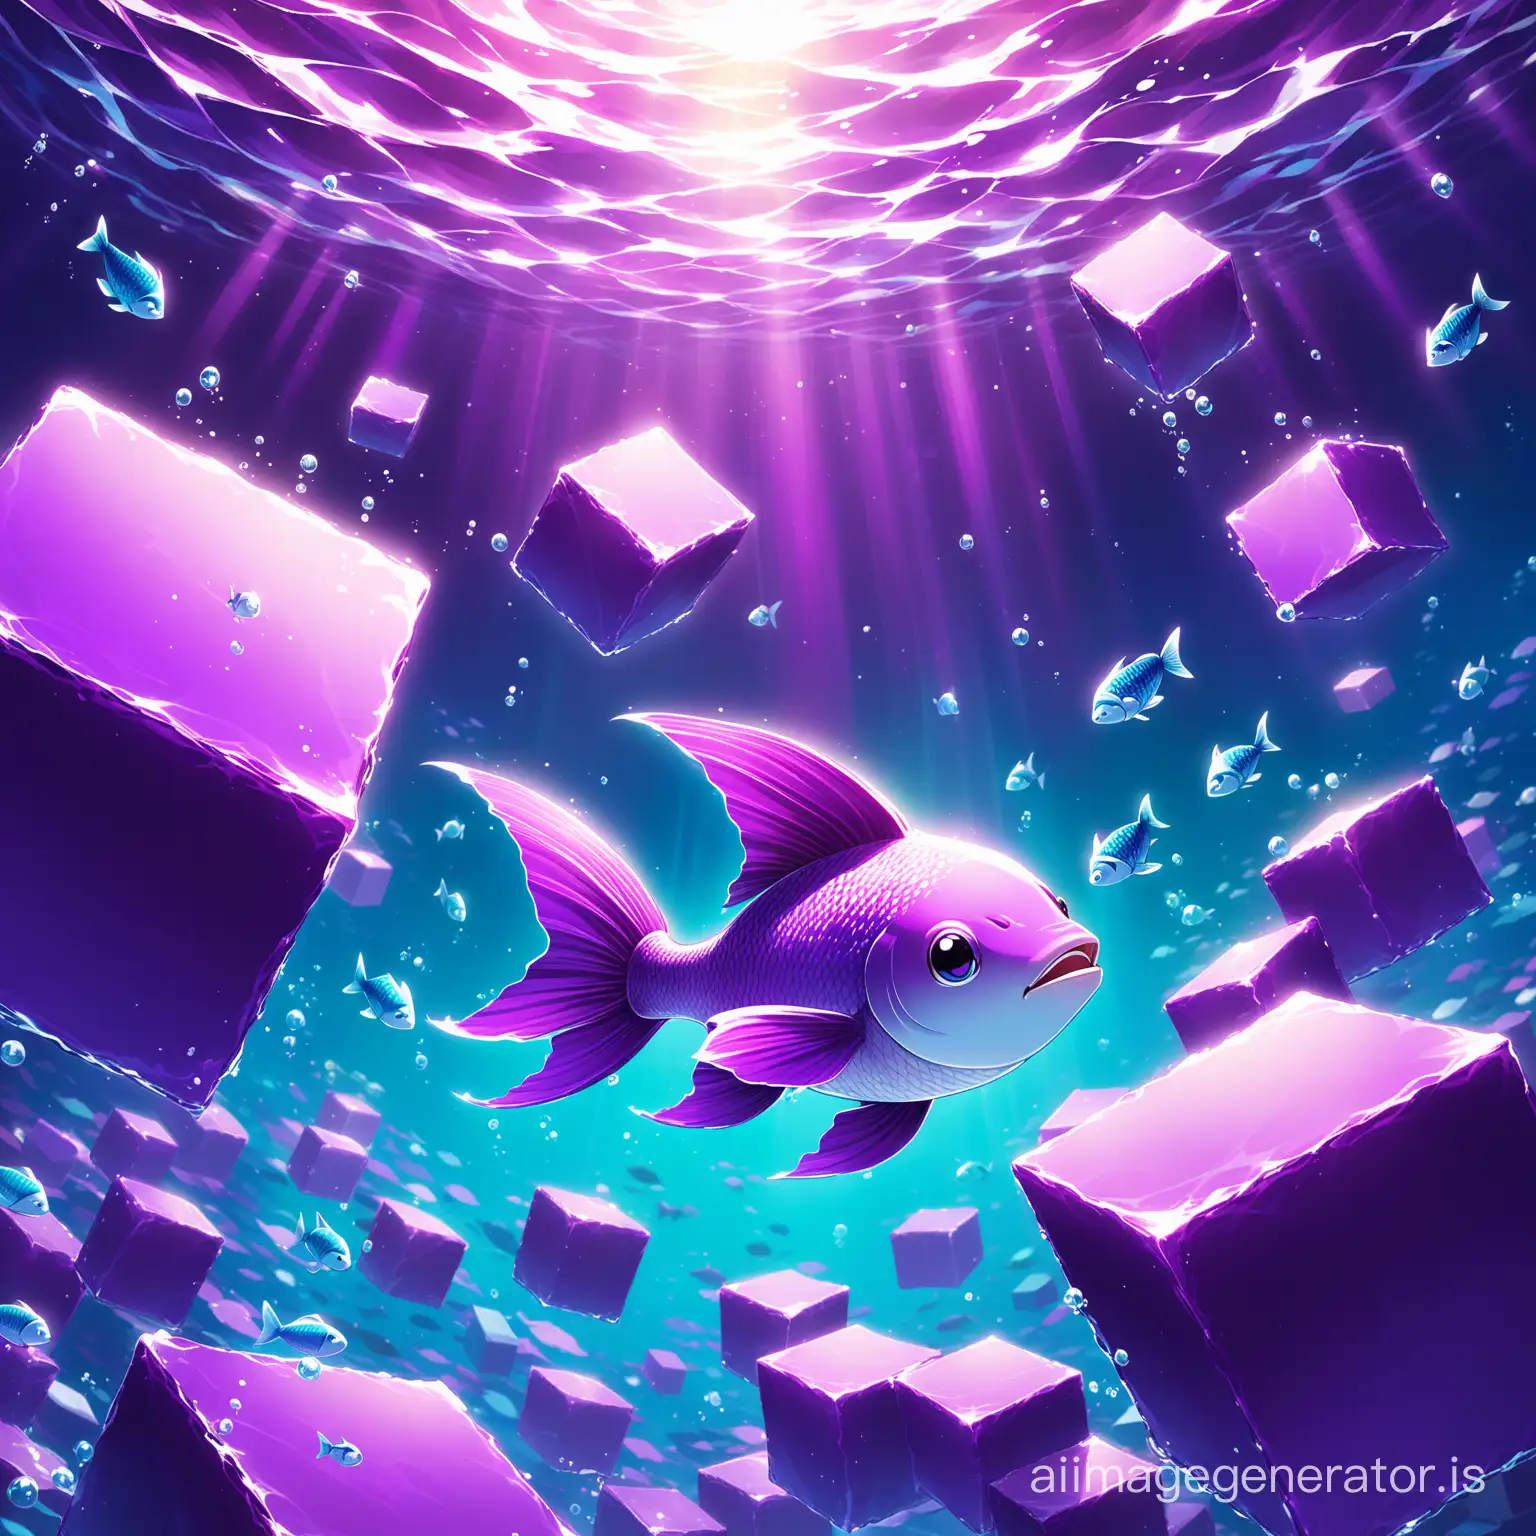 A little happy cute fish flying purple sea  super detail and High Quality
big and Purple and floating blocks are seen everywhere
Details are evident beautifully and with great precision
Lighting is carefully observed